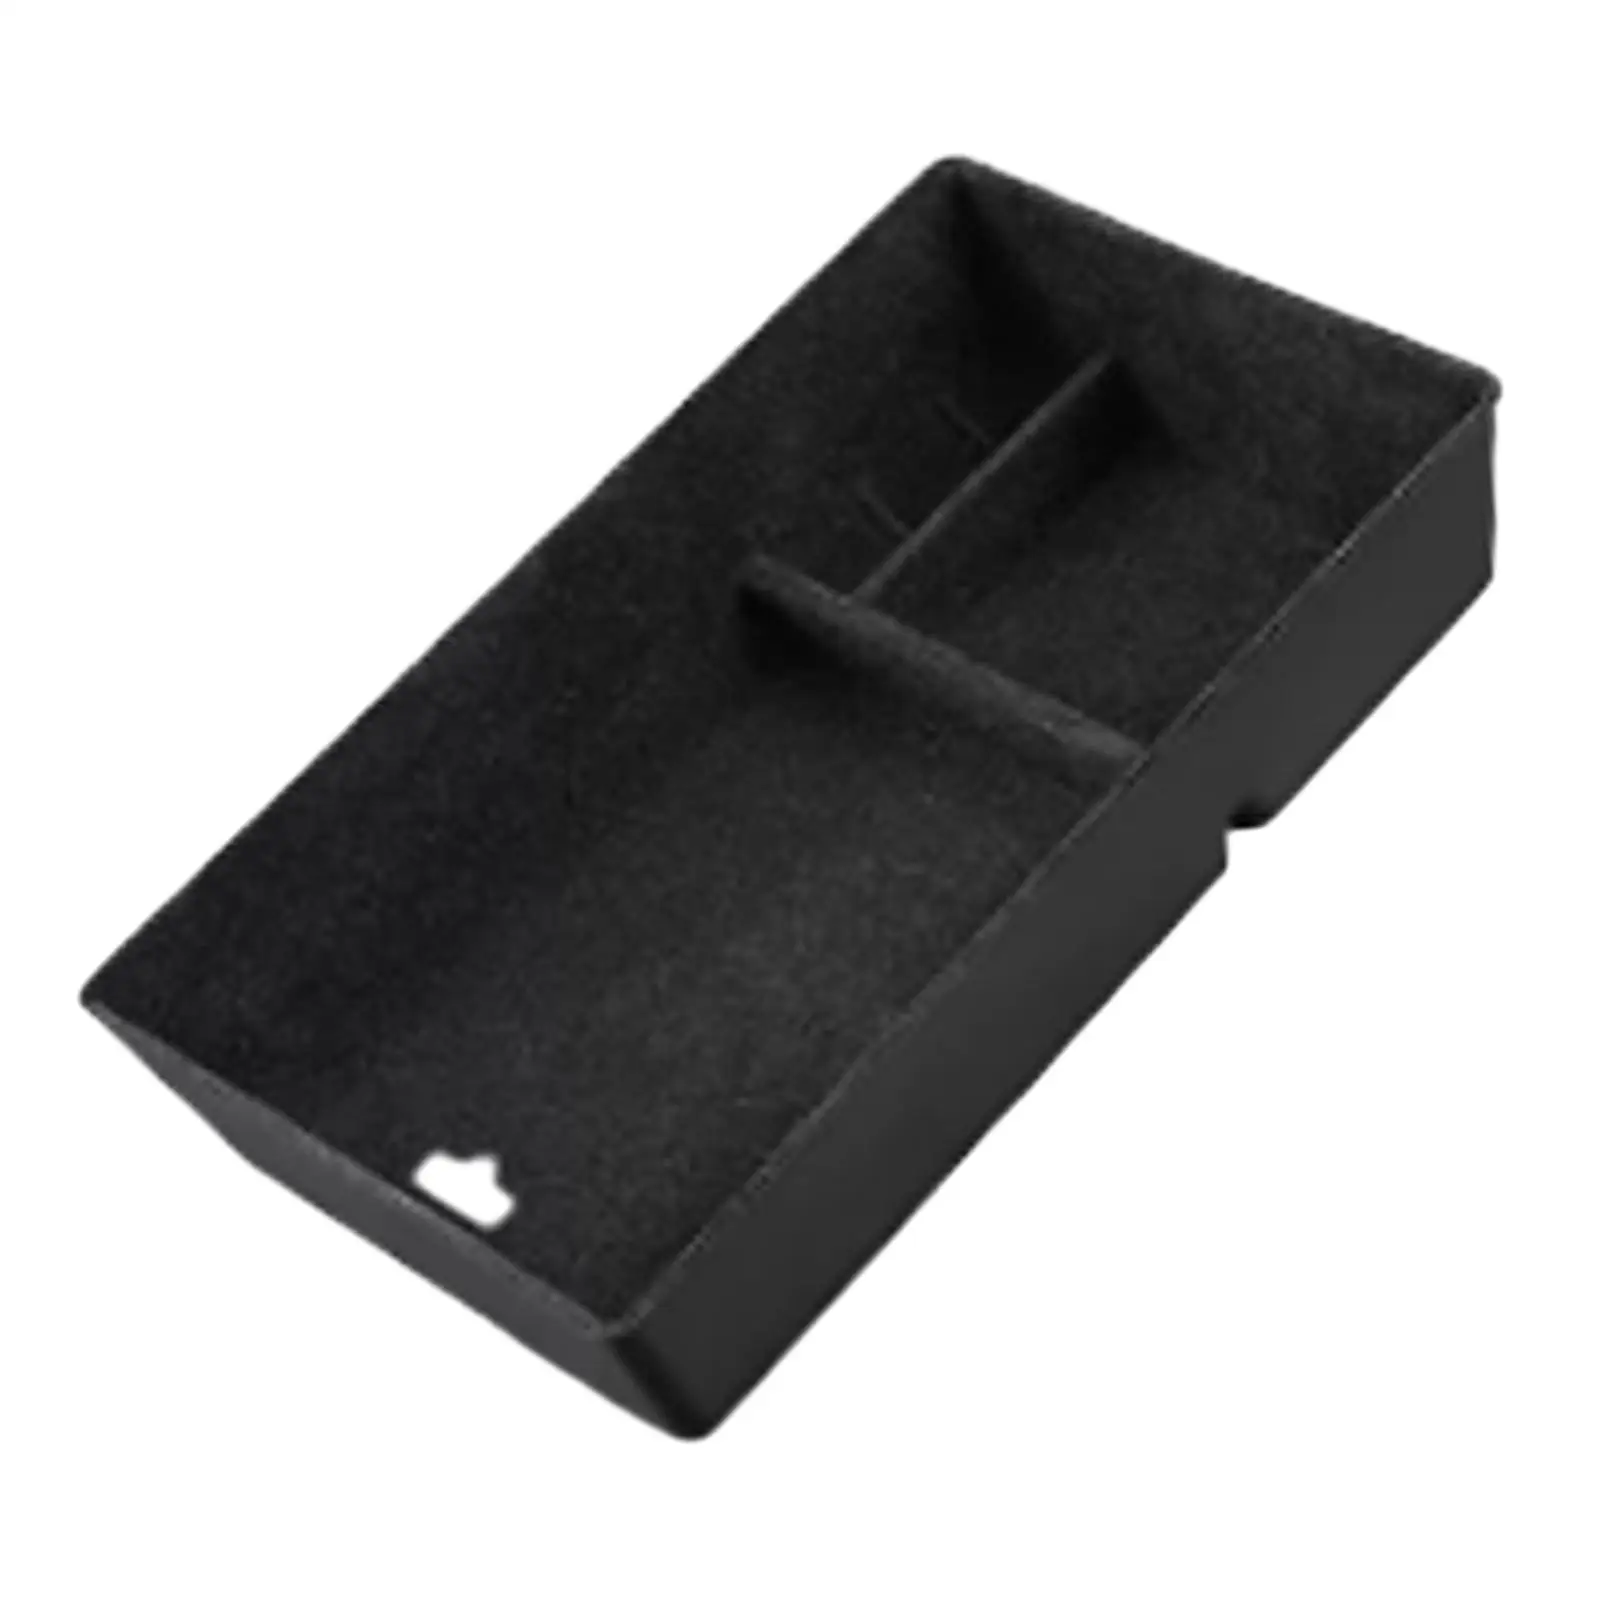 Armrest Storage Easily Install Interior Accessories Automobile Holder for Mercedes Benz 2022 to 2024 Replace Easily Install